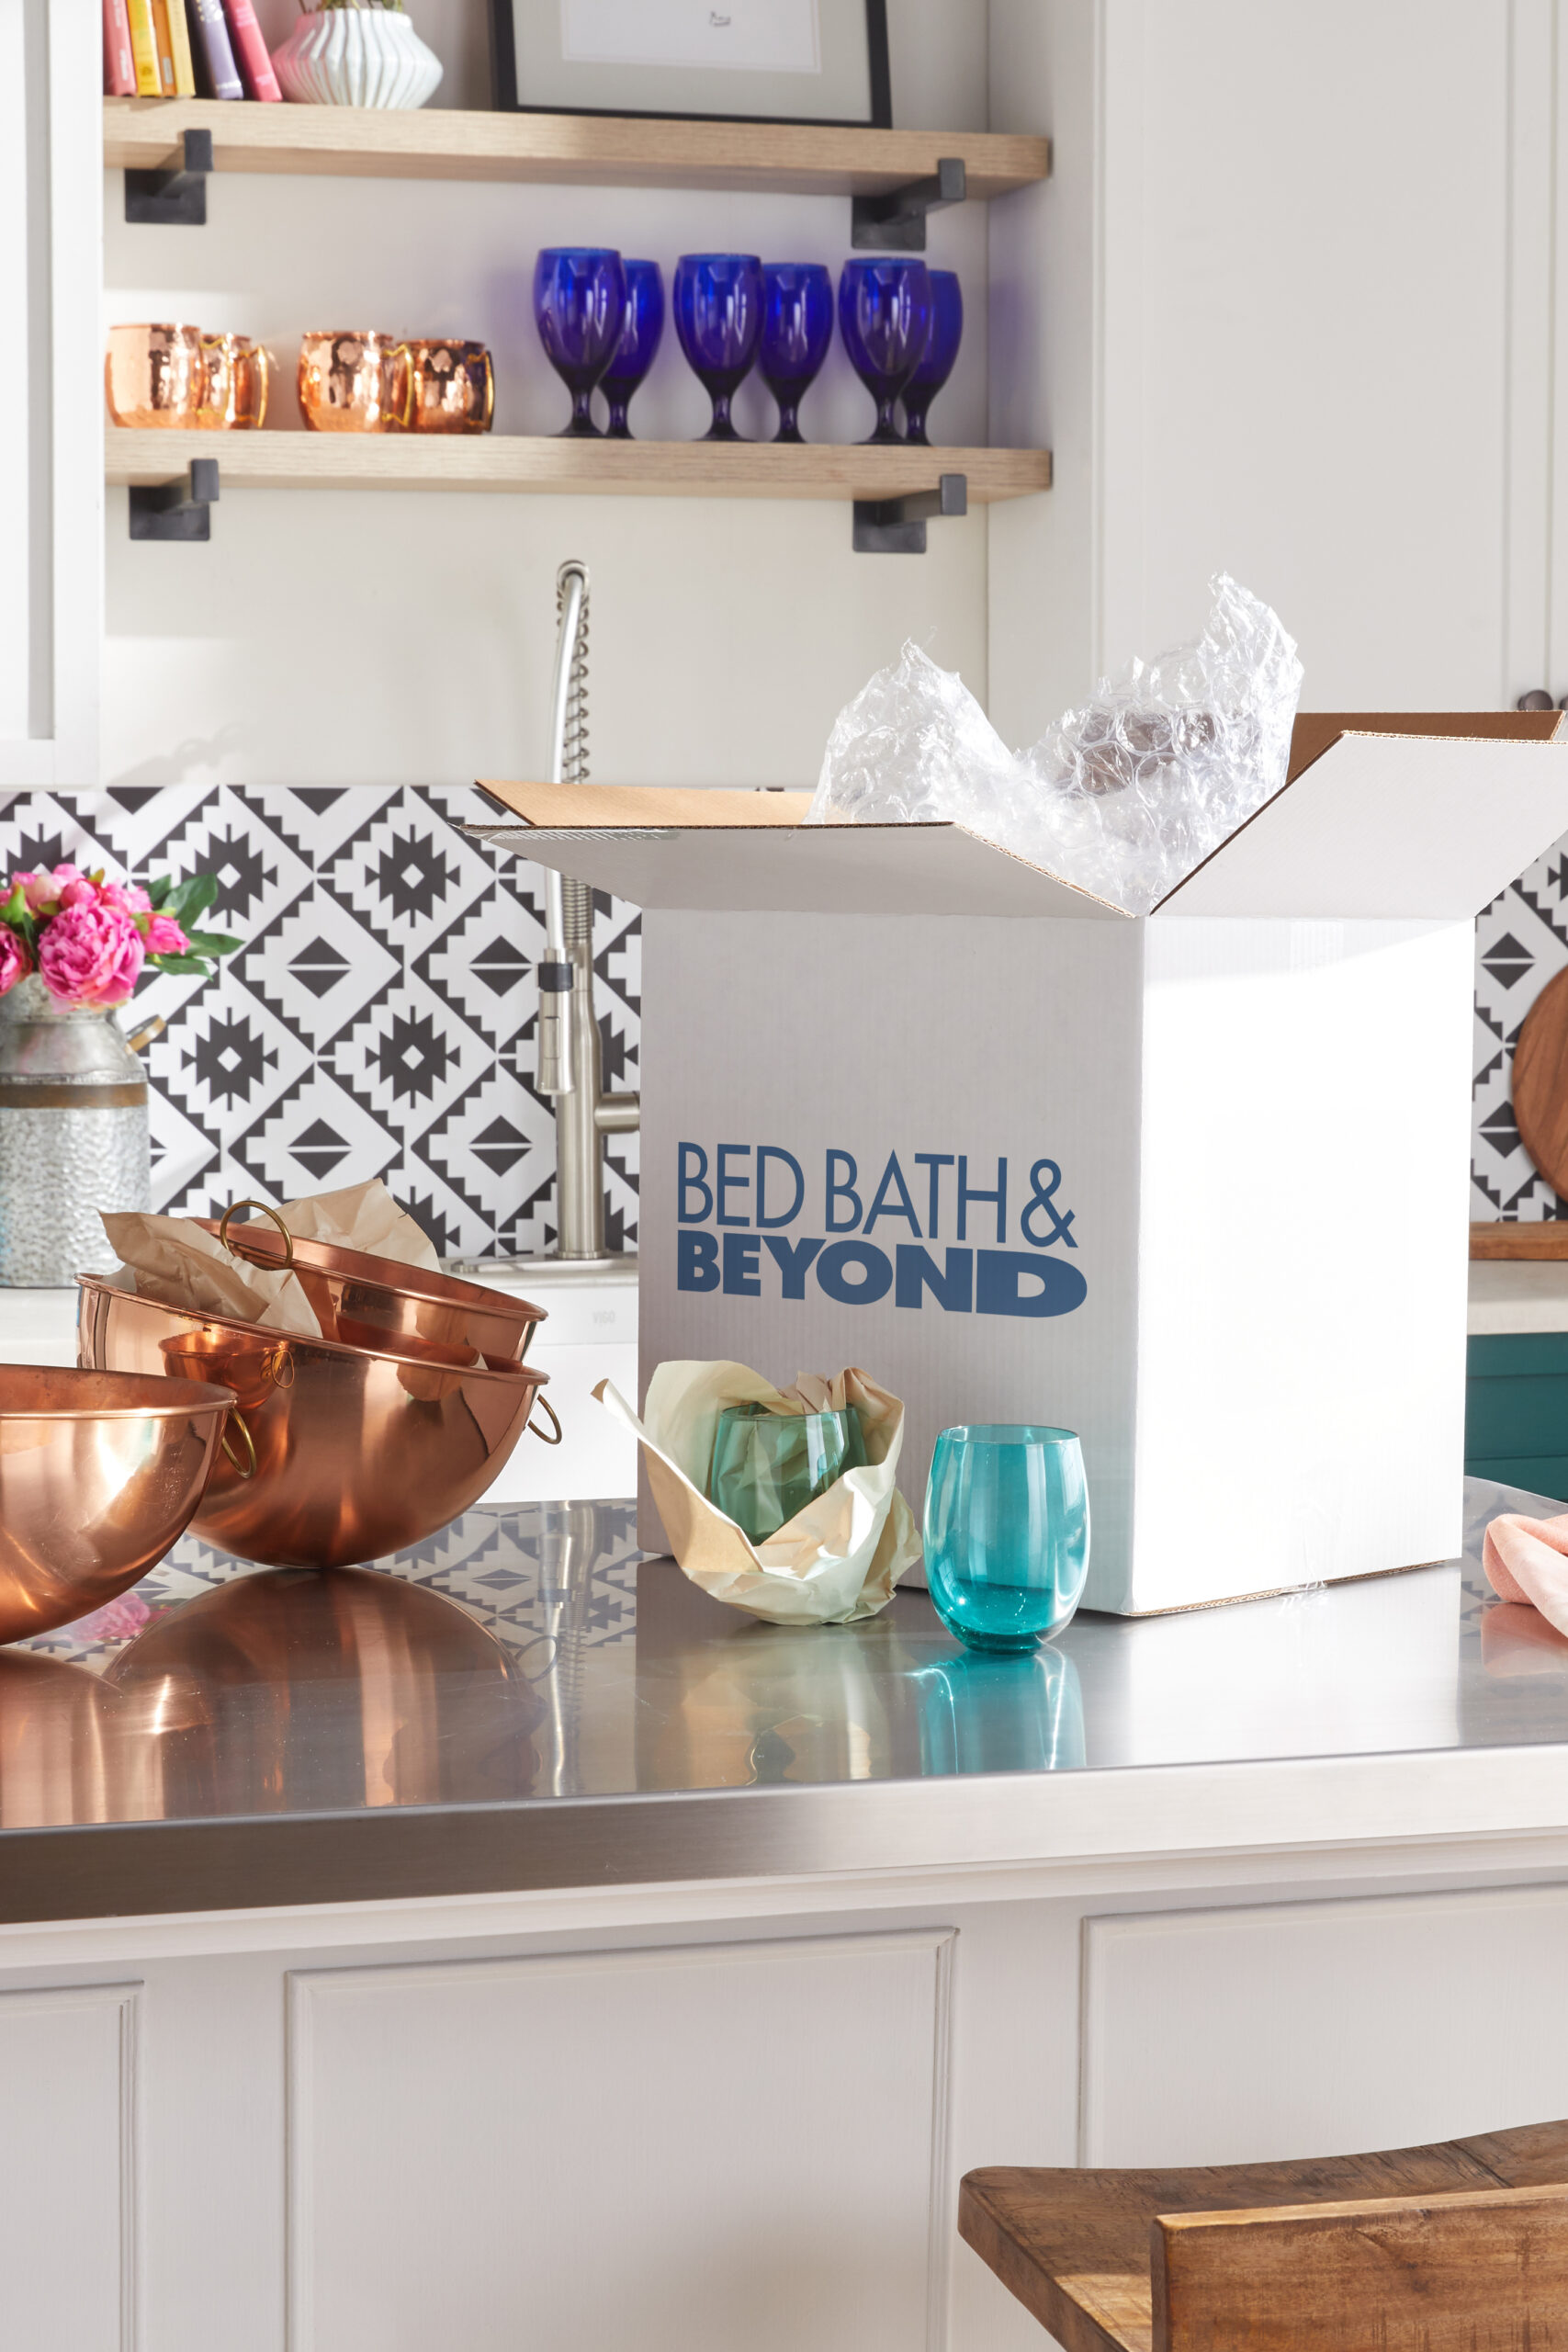 How Overstock put itself in prime position to capture the Bed Bath & Beyond branding.